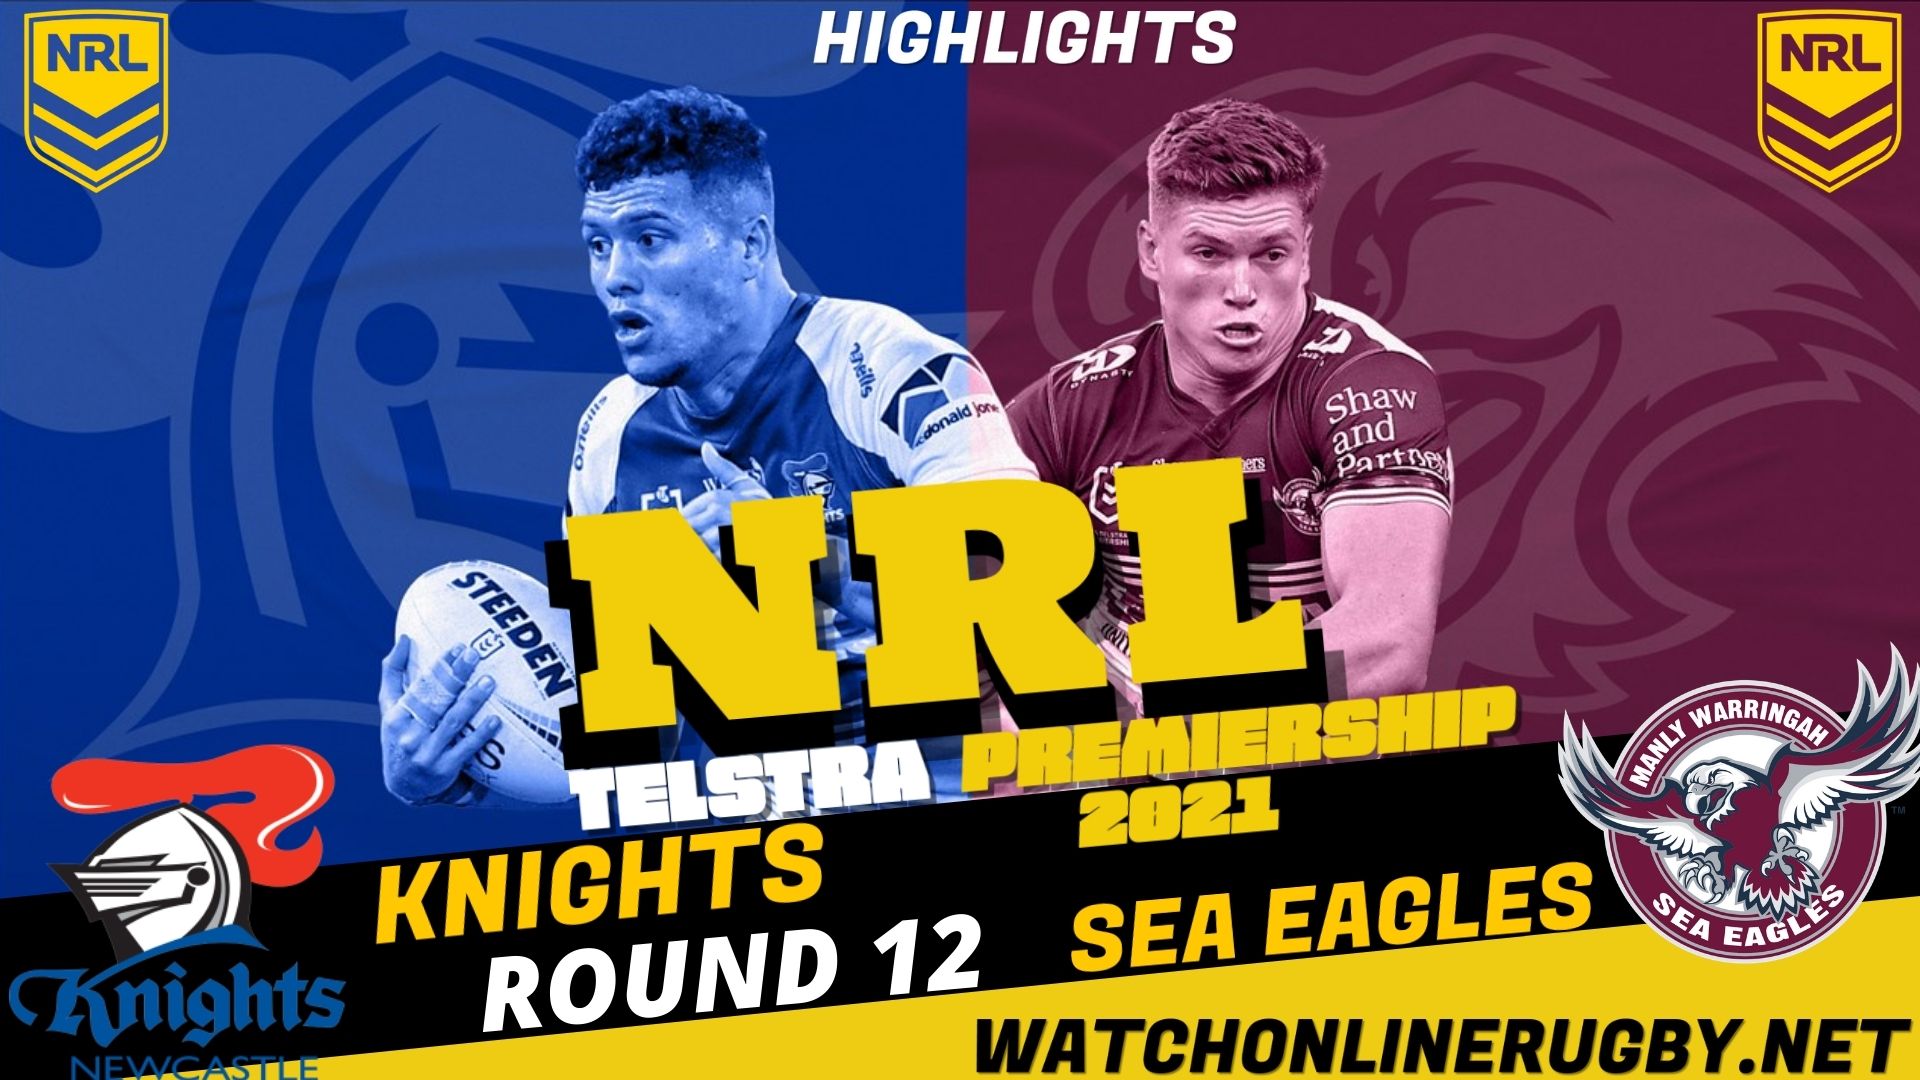 Knights Vs Sea Eagles Highlights RD 12 NRL Rugby